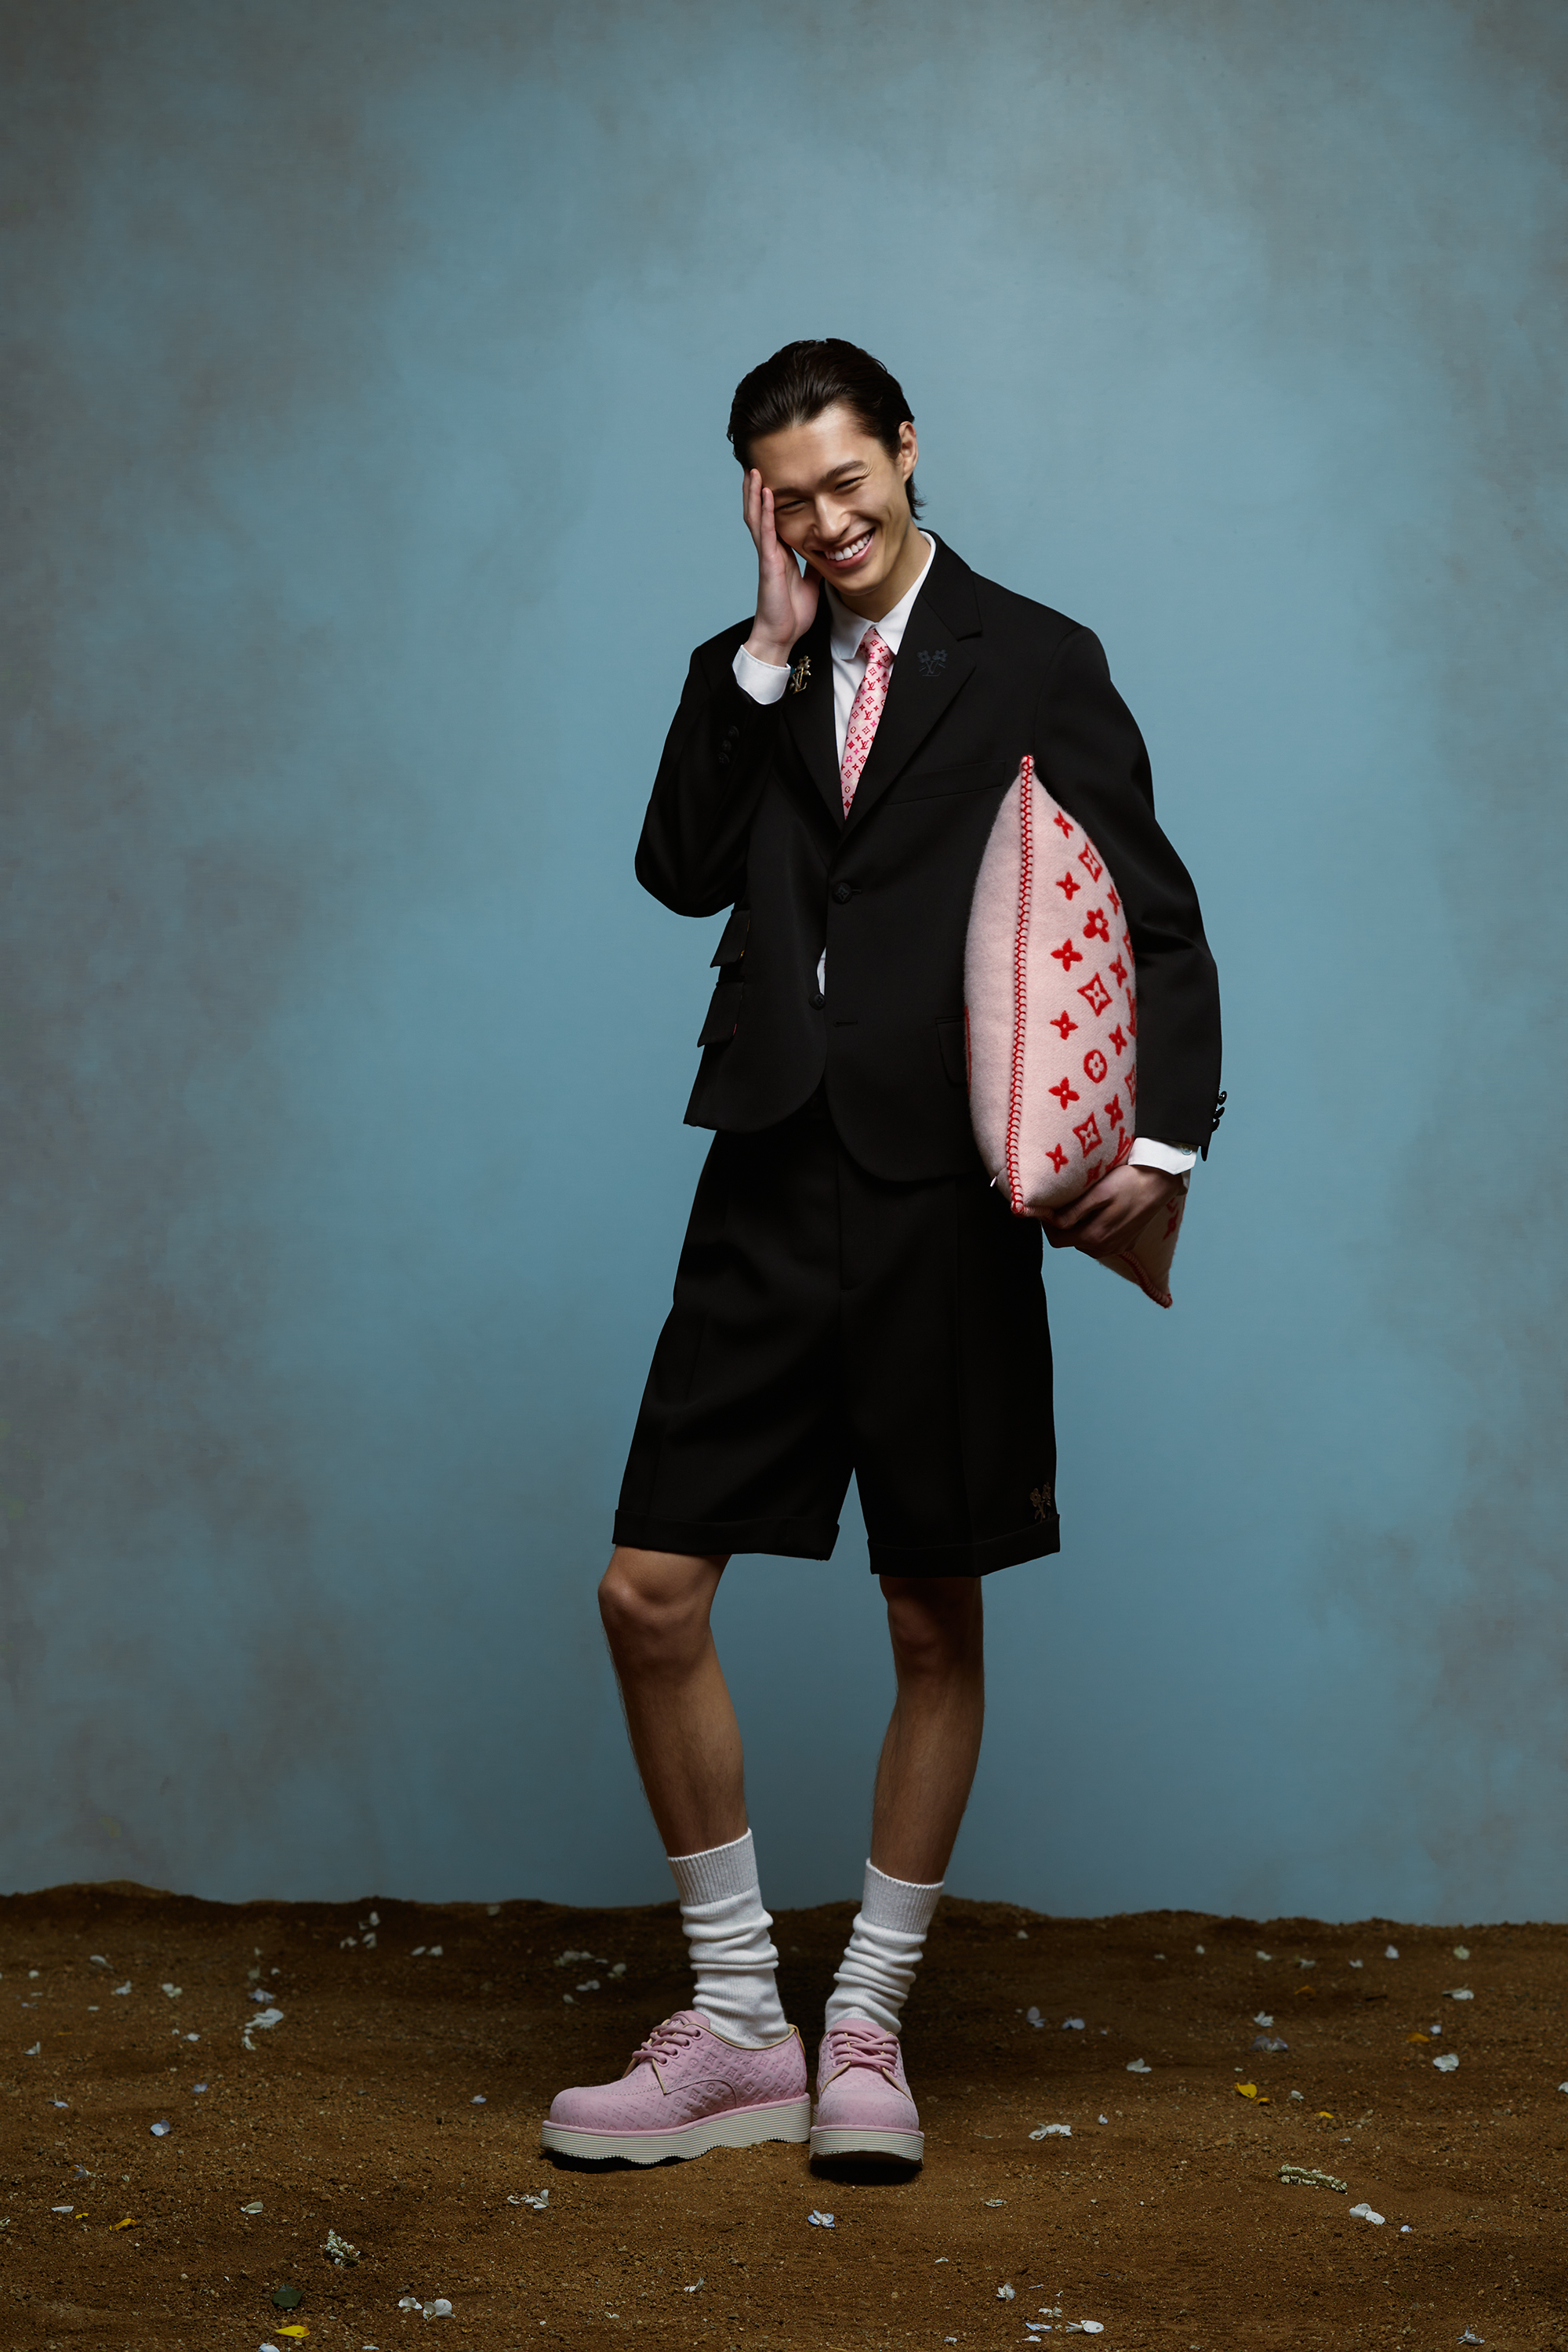 Person in a suit jacket with shorts, holding a patterned pillow, smiling, and touching their temple